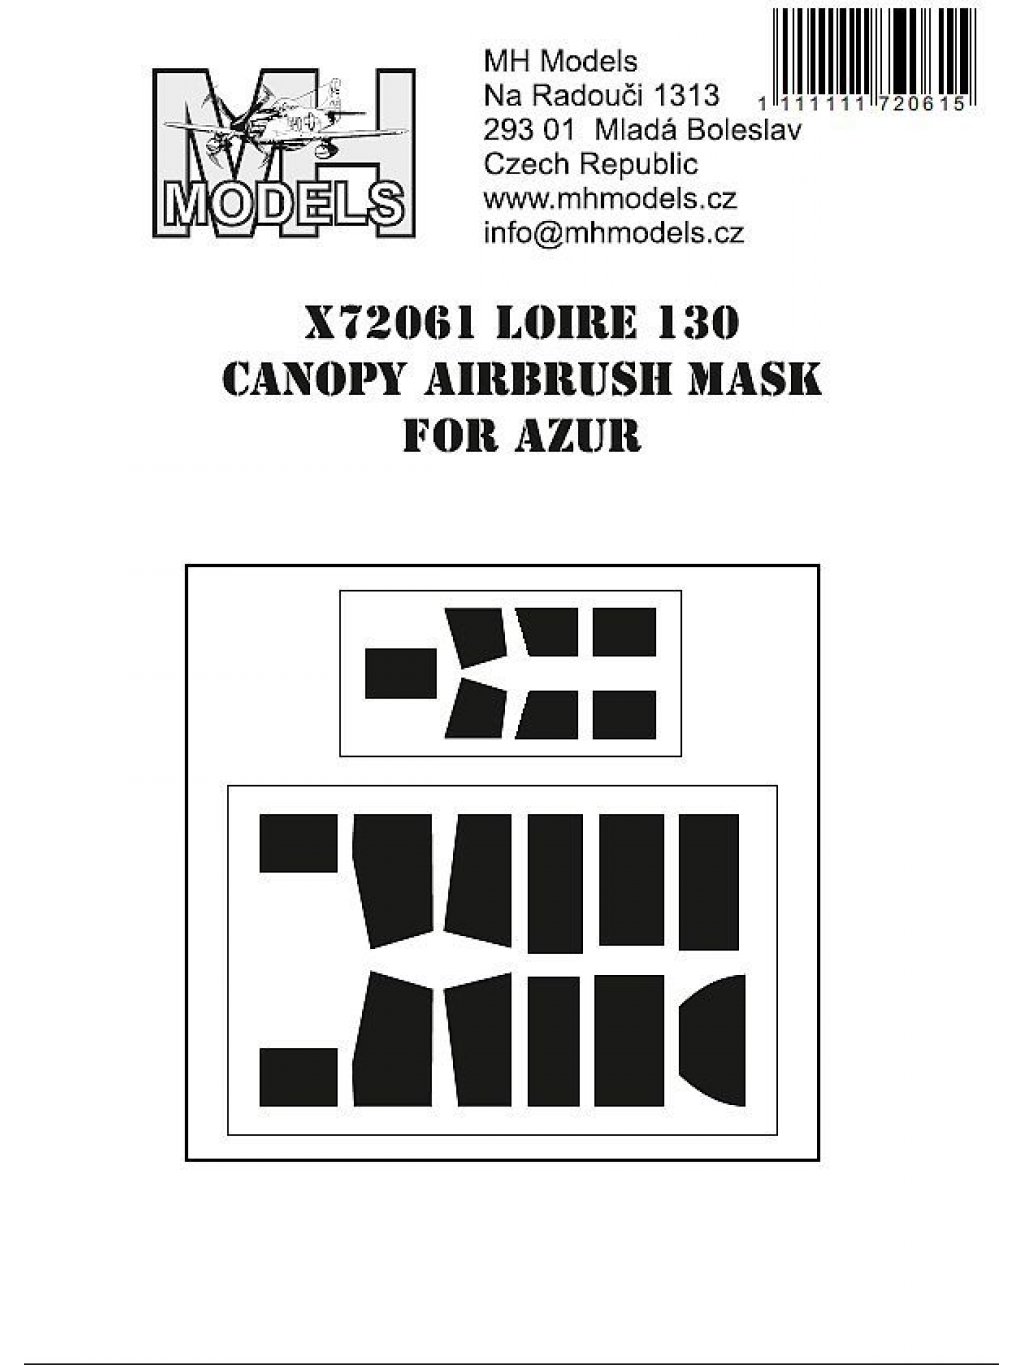 Loire 130 canopy airbrush mask for Azur